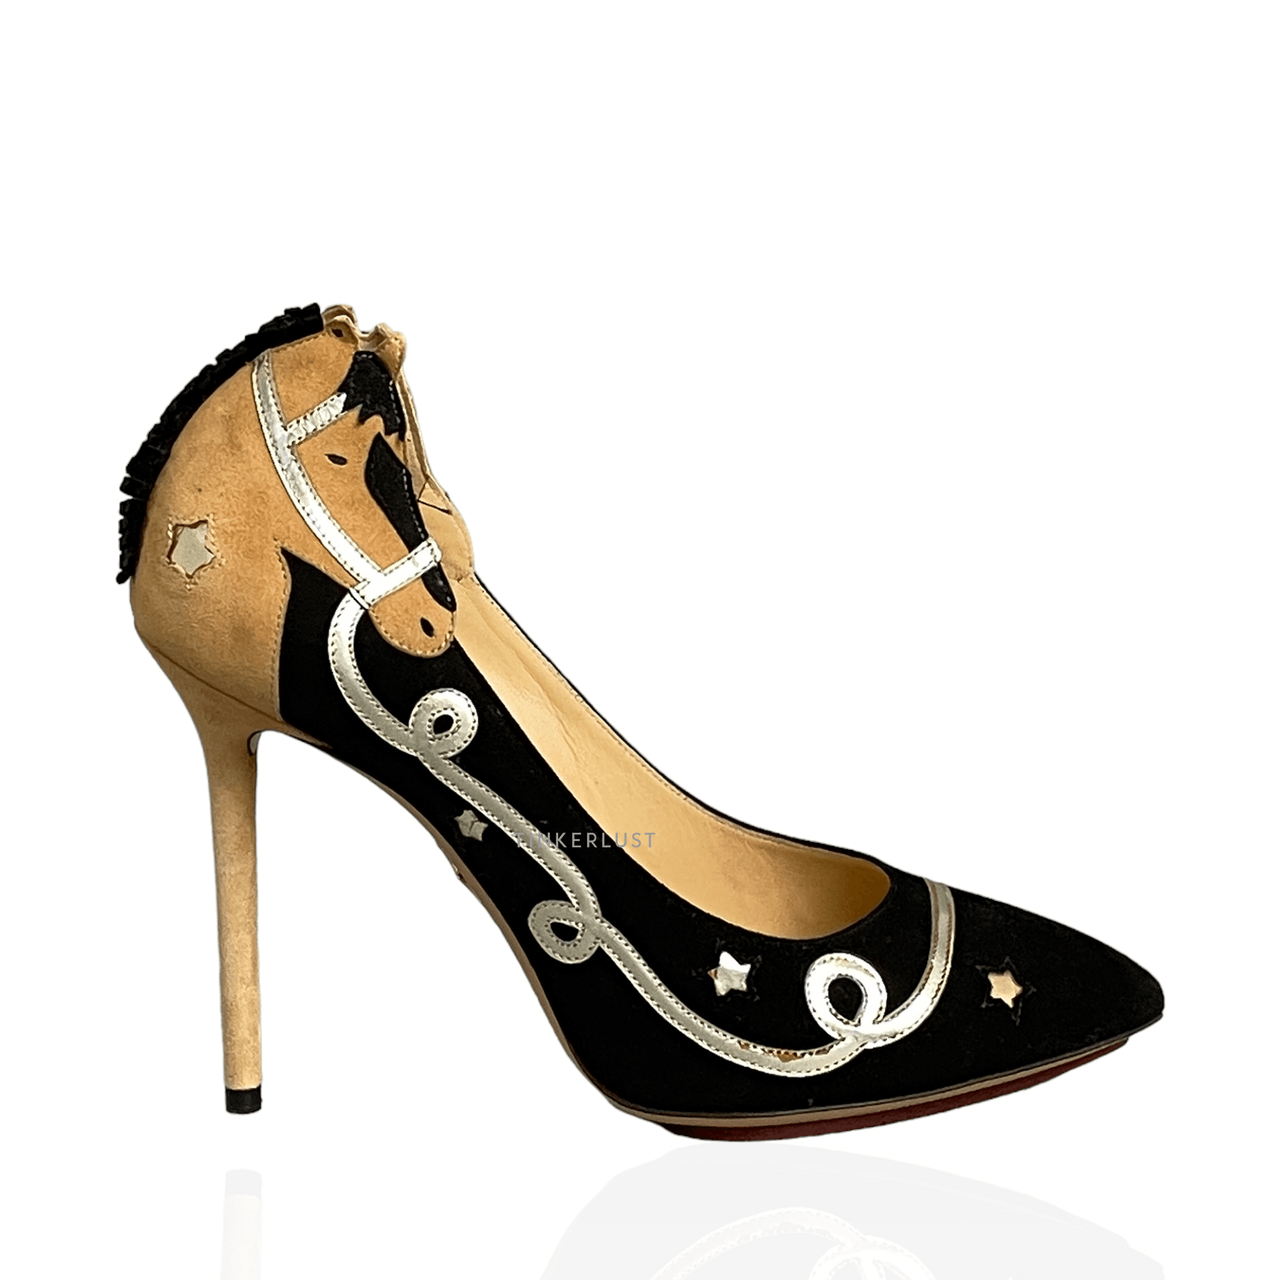 Charlotte Olympia Two Tone Suede Giddy Up Pumps Heels 